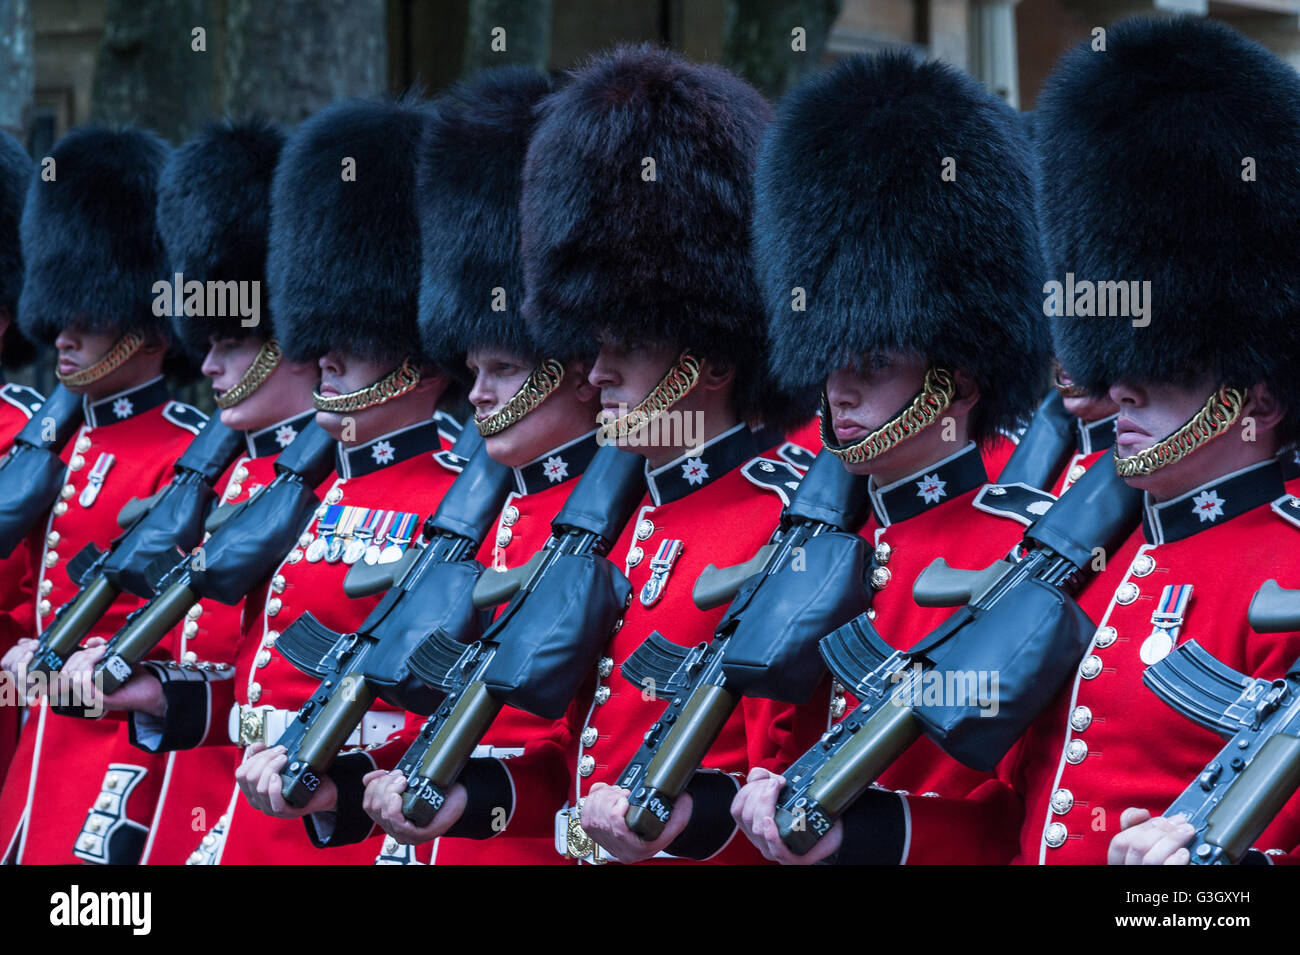 London, UK. 11th June 2016. The Foot Guards march by the Buckingham Palace during the annual Queen's Birthday Parade. Wiktor Szymanowicz/Alamy Live News Stock Photo